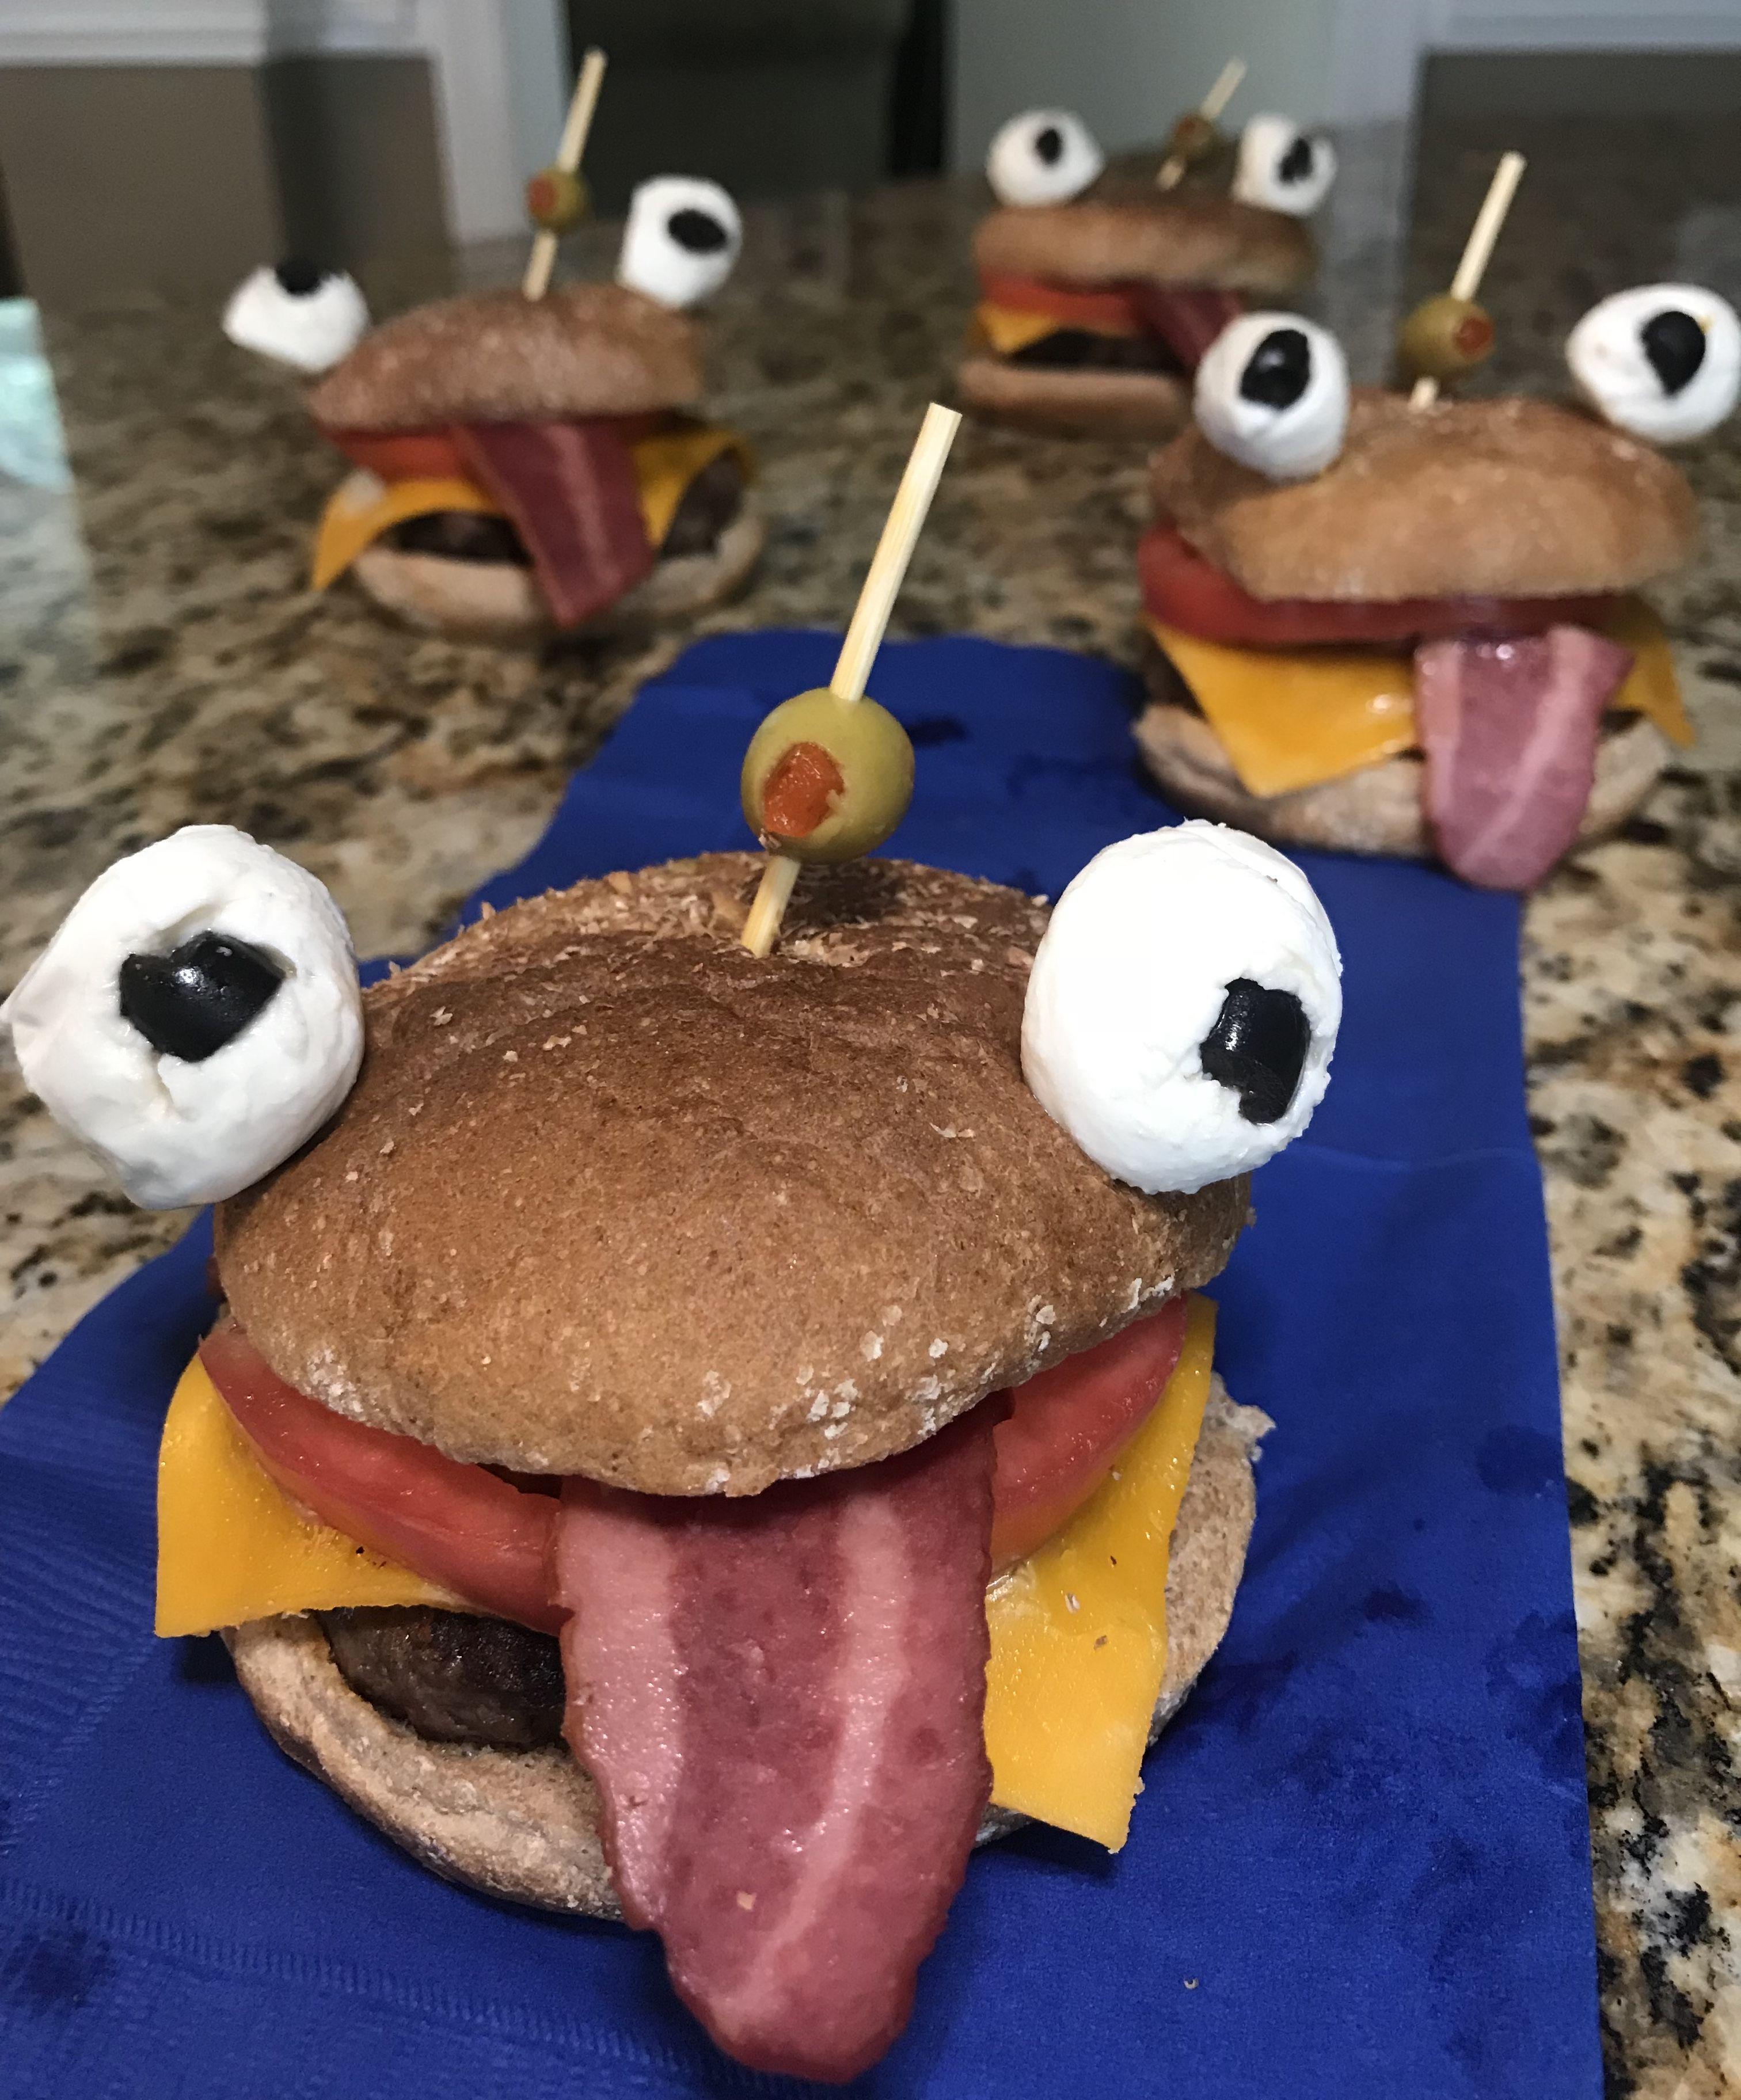 Durr Burger Logo - Beefy Onion Durr Burgers! Oh yeah baby, let's eat some Fortnite food ...